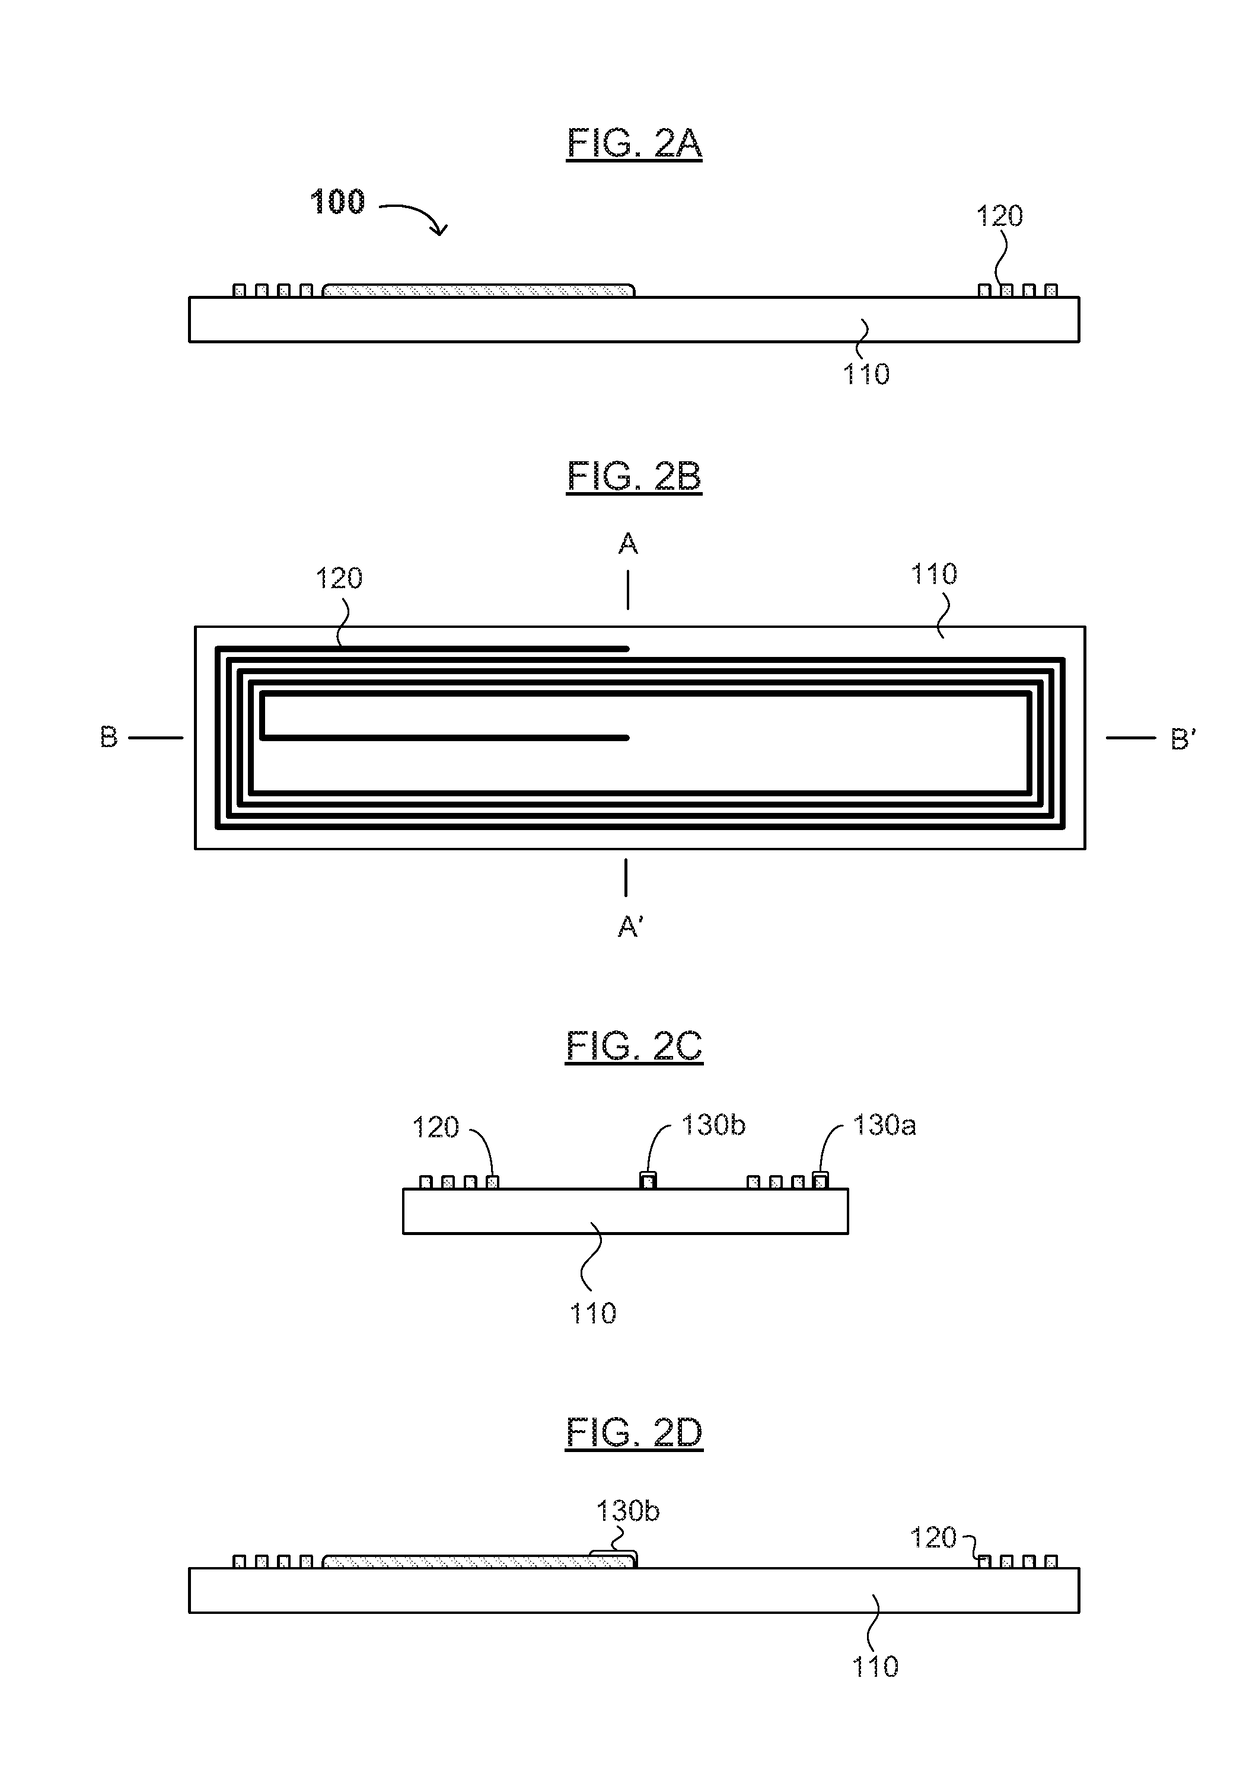 Electronic Device Having an Antenna, Metal Trace(s) and/or Inductor With a Printed Adhesion Promoter Thereon, and Methods of Making and Using the Same